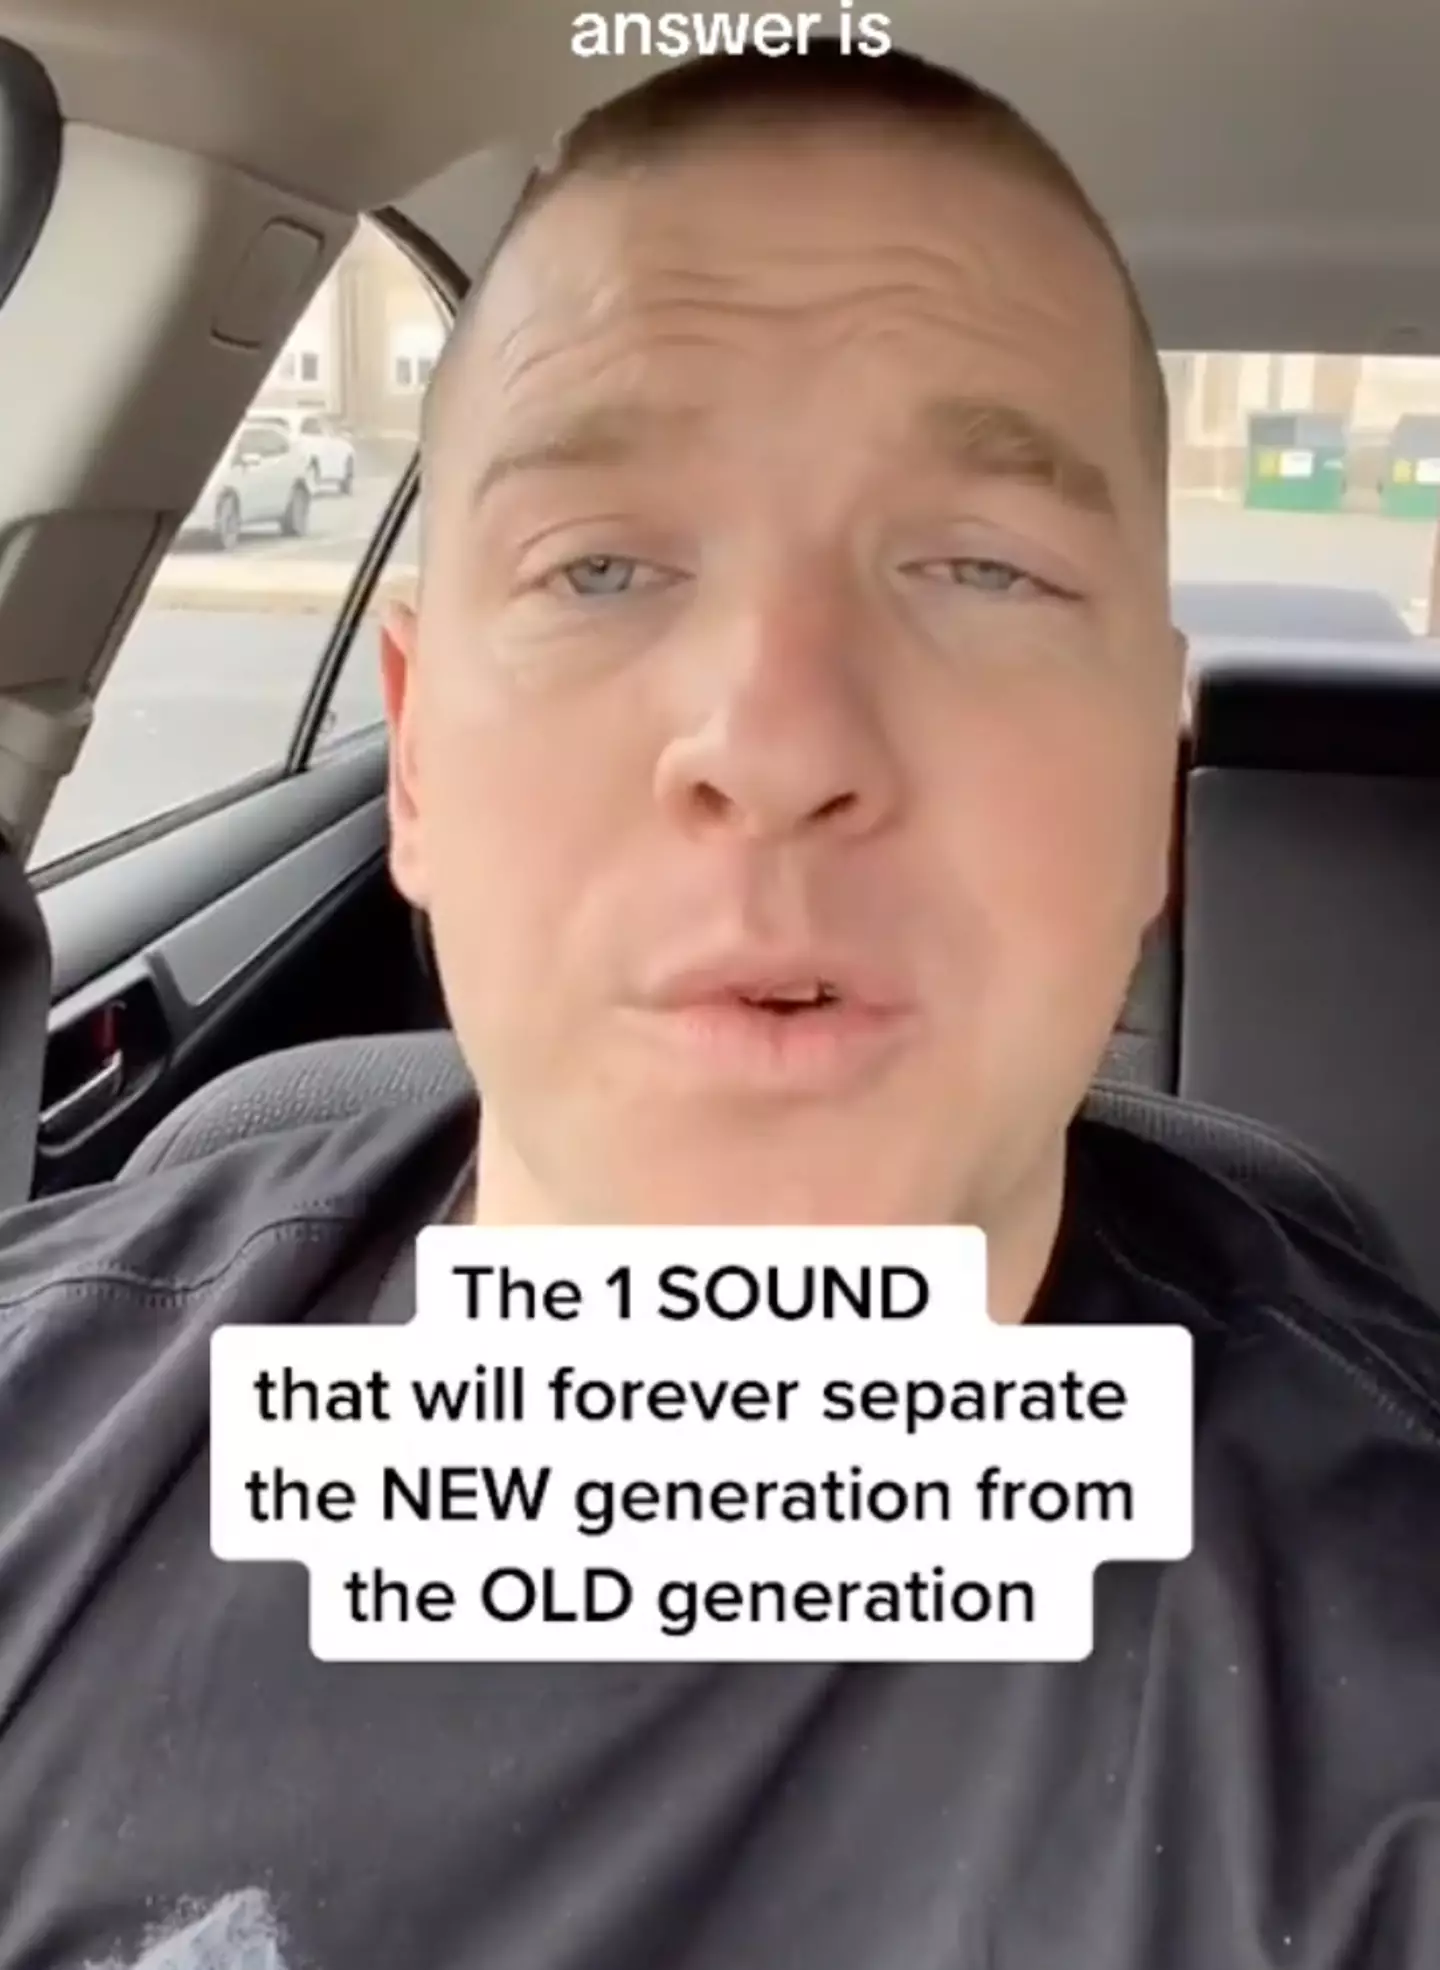 There's one sound that separates generations, according to this TikToker.